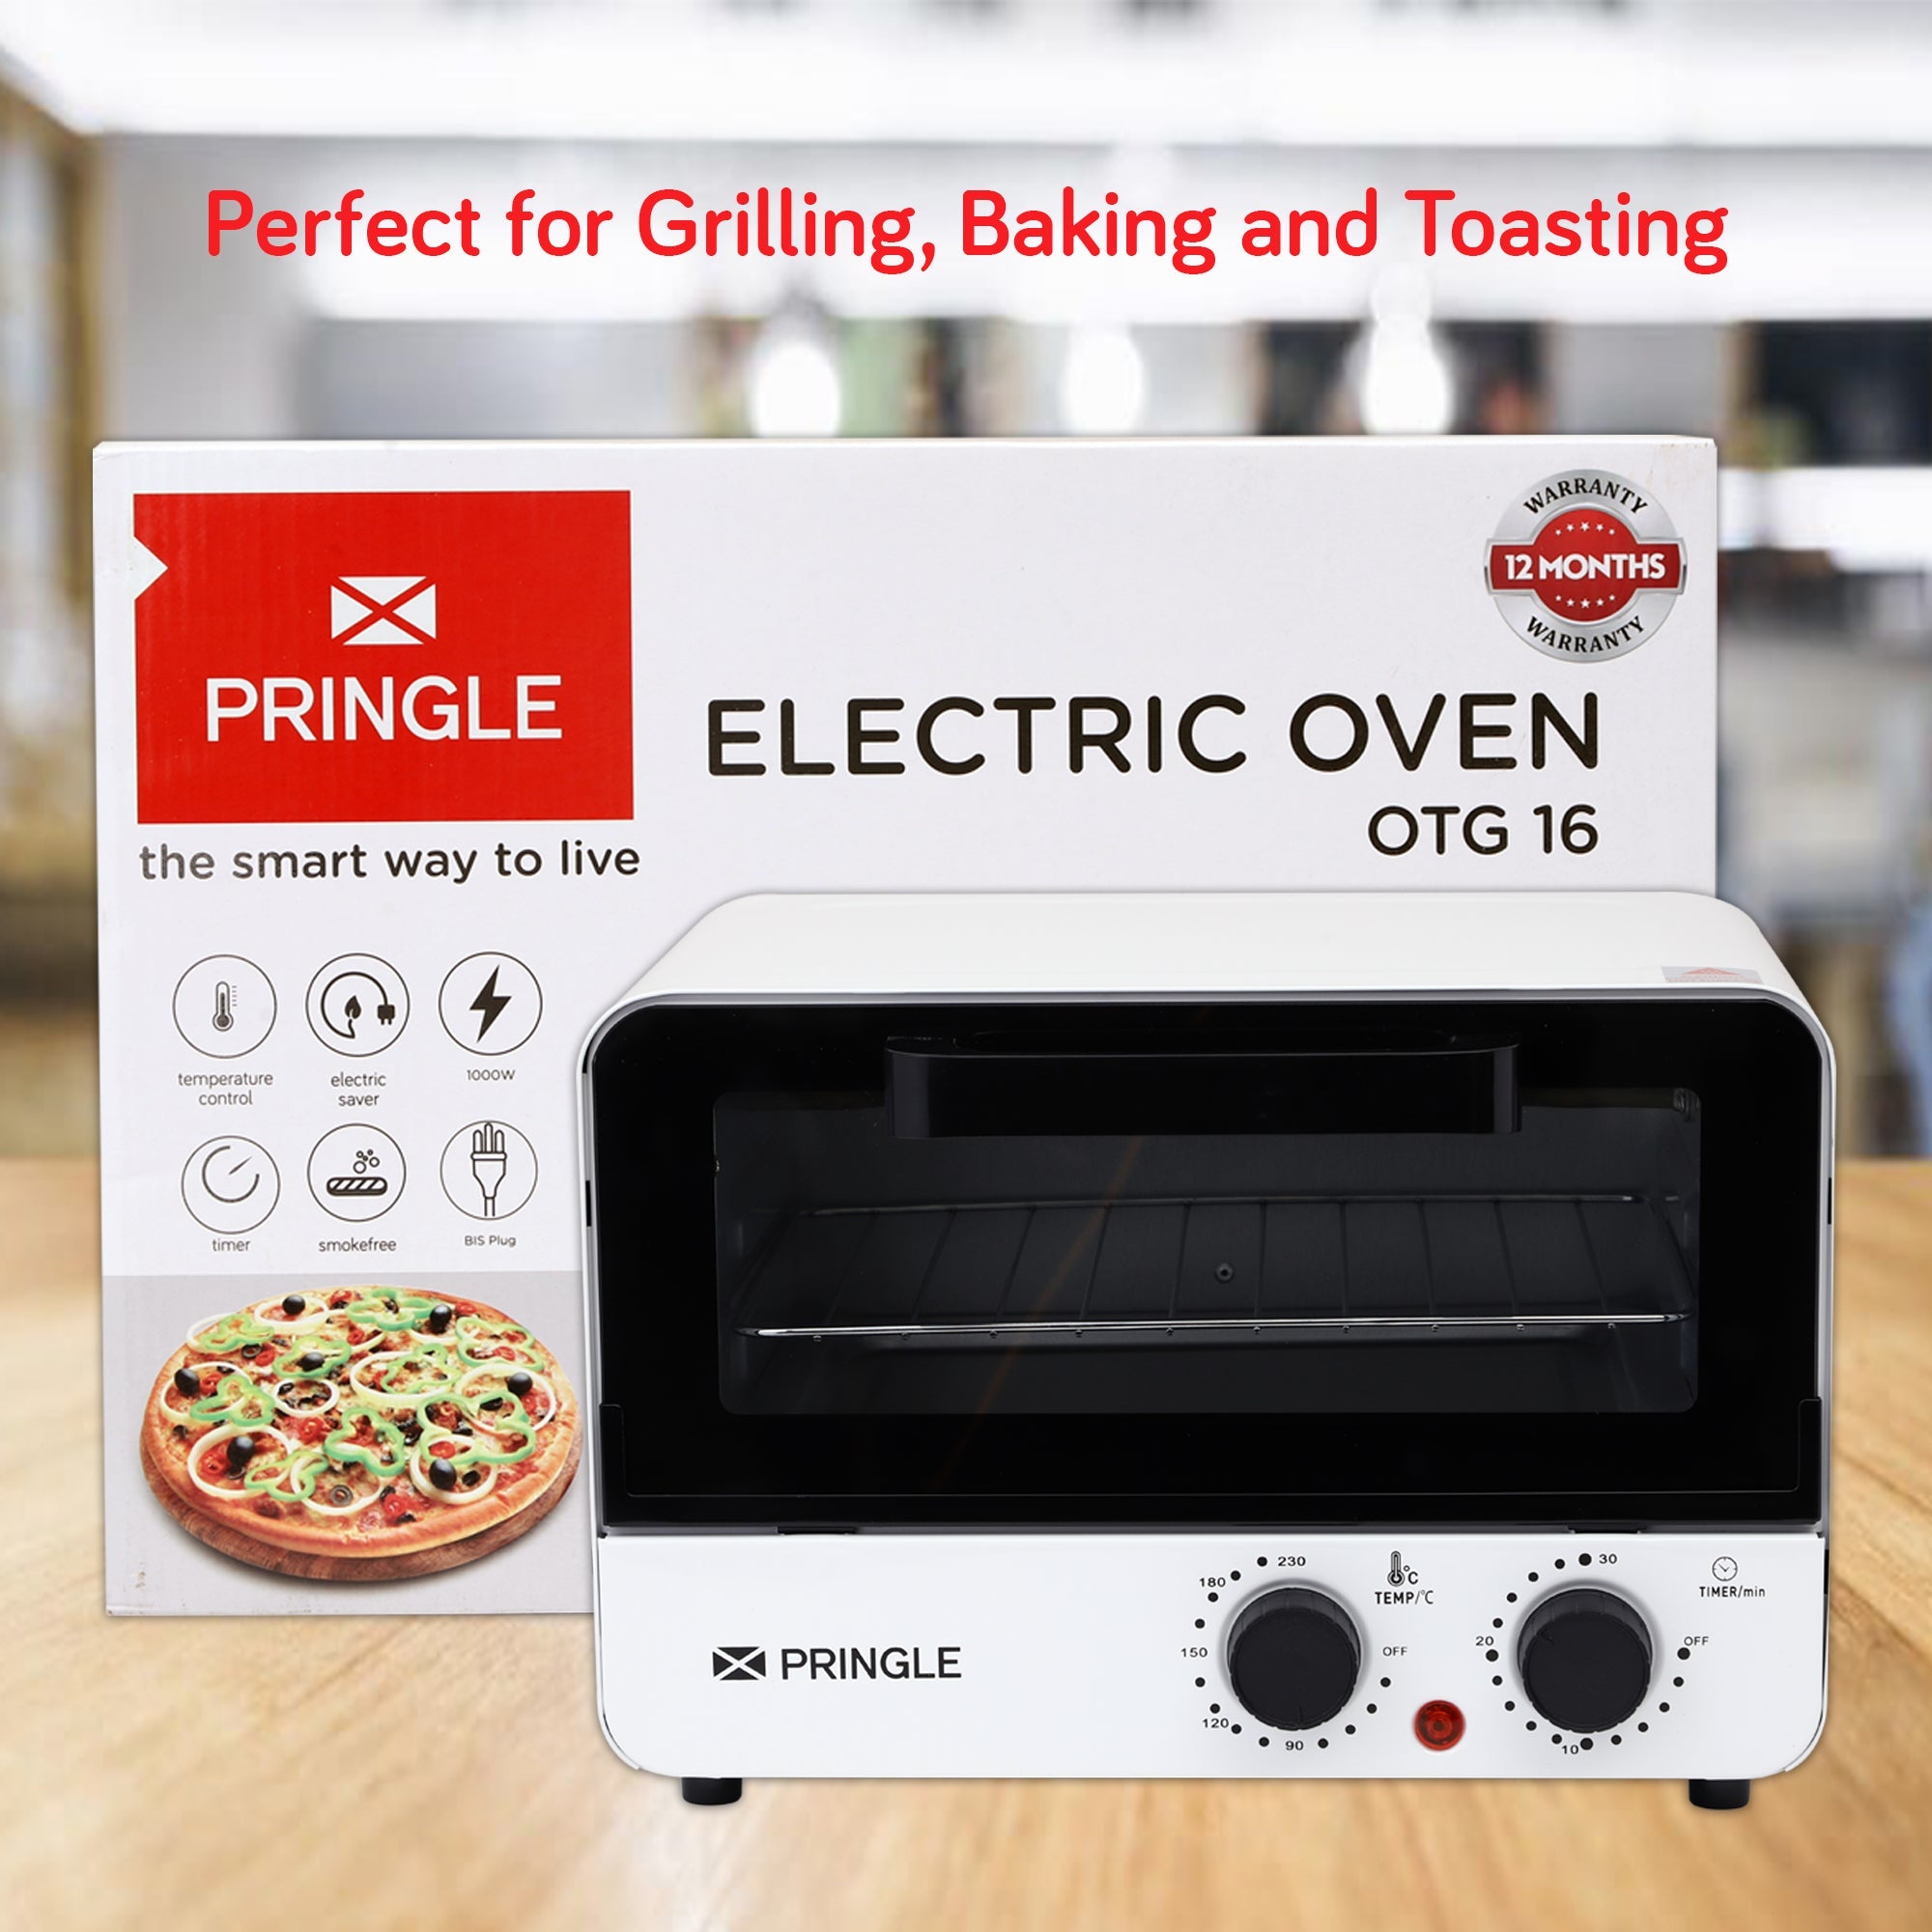 Pringle Oven Toaster Griller (OTG)16 - 12 White And Black - with Rotisserie, Auto-Shut Off, Heat-Resistant Tempered Glass, Multi-Stage Heat Selection 1000Watt - Pringle Appliances